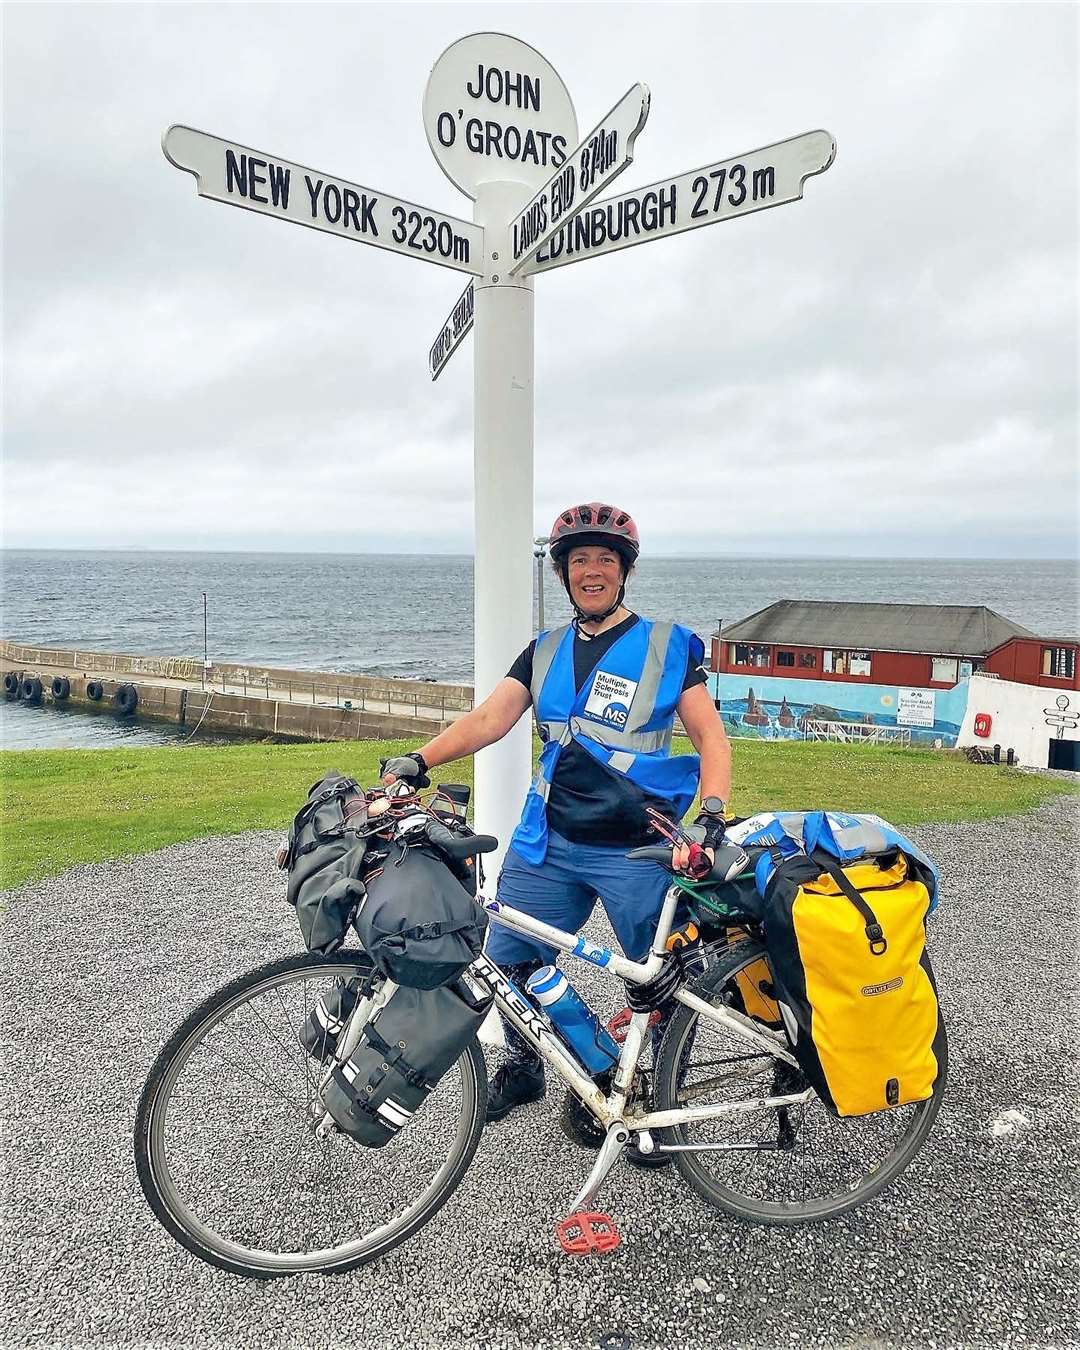 Lis van Lynden suffers from MS and is raising money for a MS charity by cycling around the British coastline.